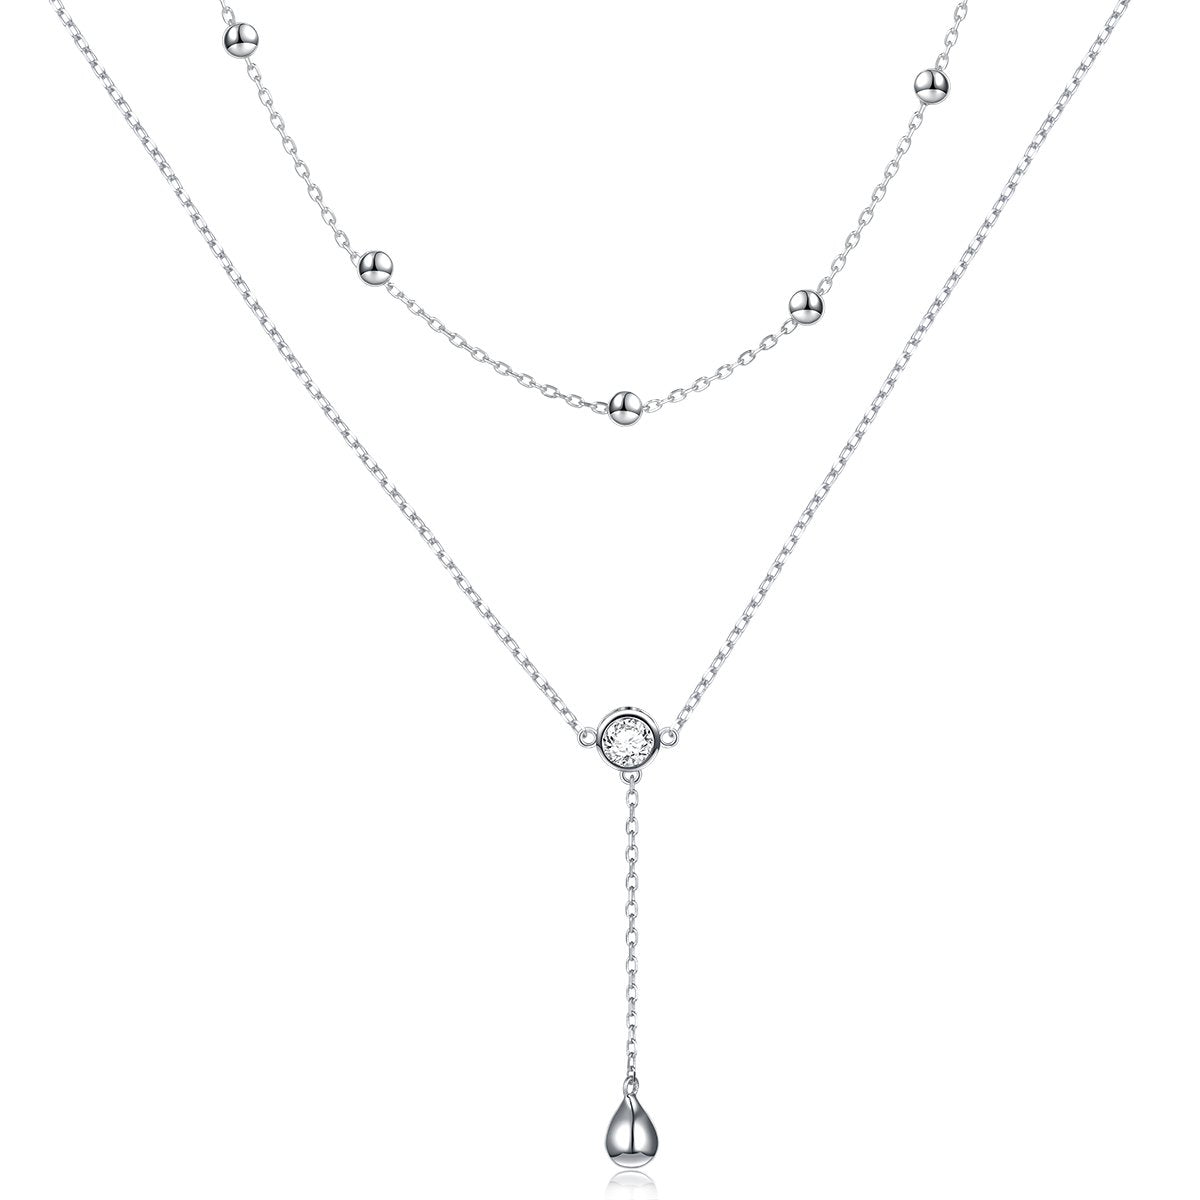 DAOCHONG Layered Necklace for Women Sterling Silver Multilayer Chain Lariat Choker Necklace for Women